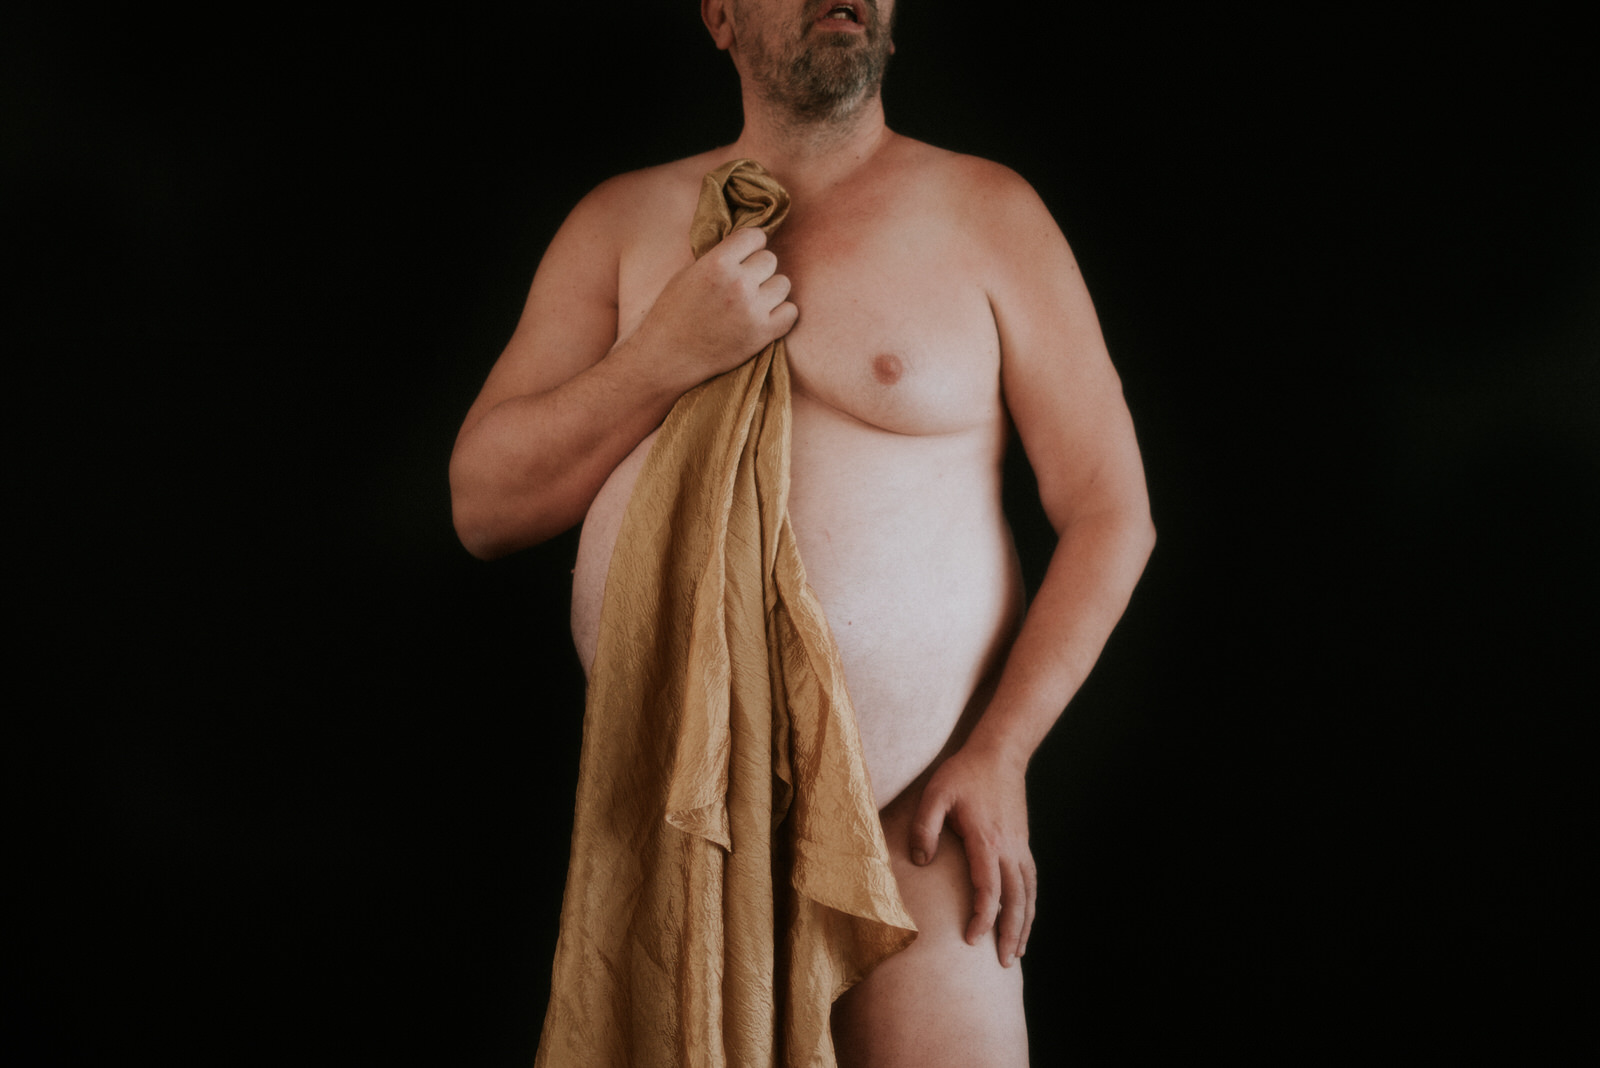 Male implied nude photography